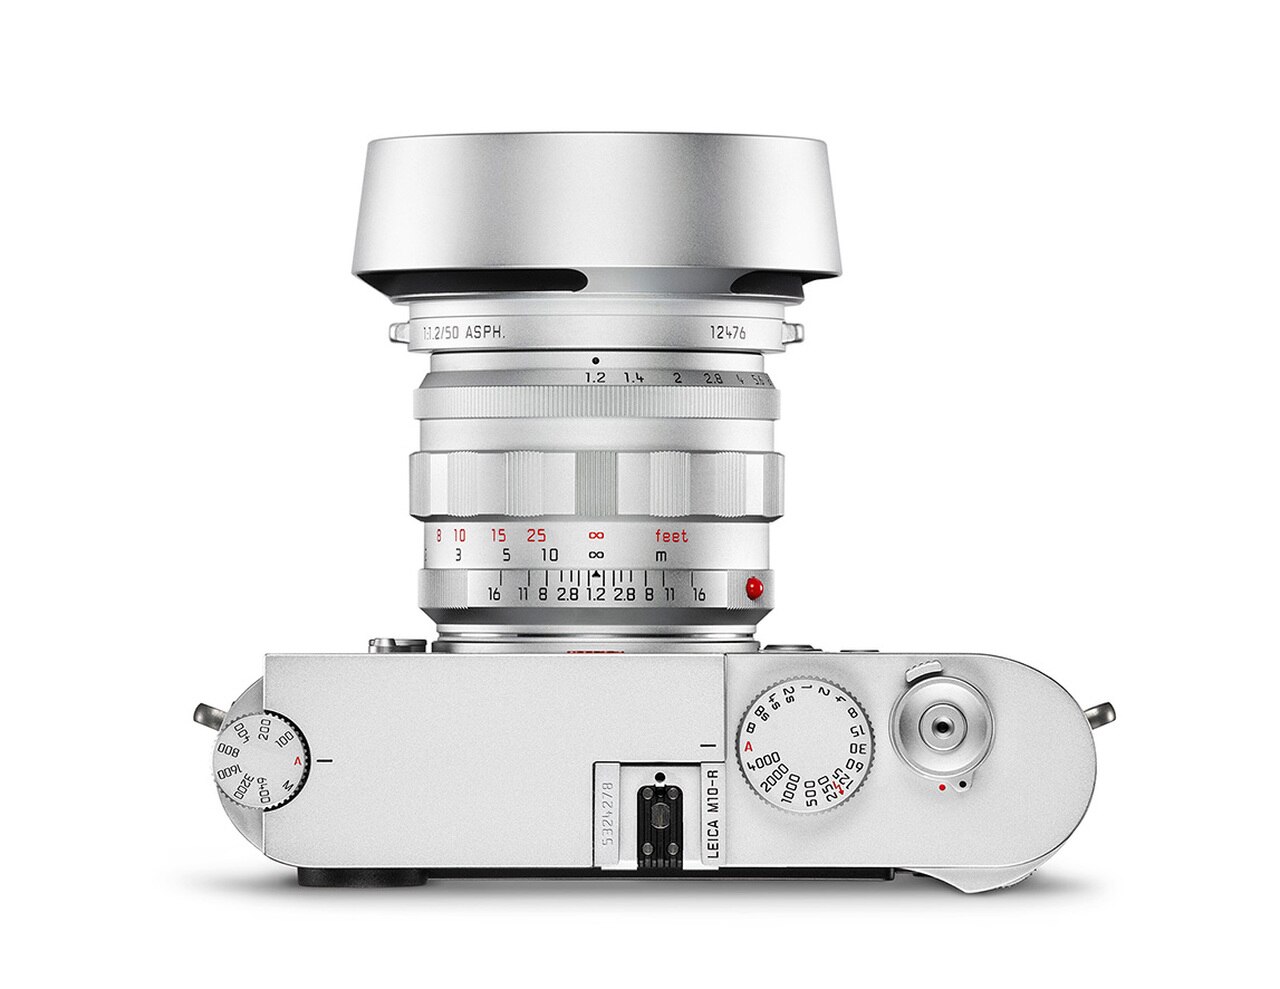 Coming soon: Leica Noctilux M 50mm f/1.2 ASPH Heritage limited 